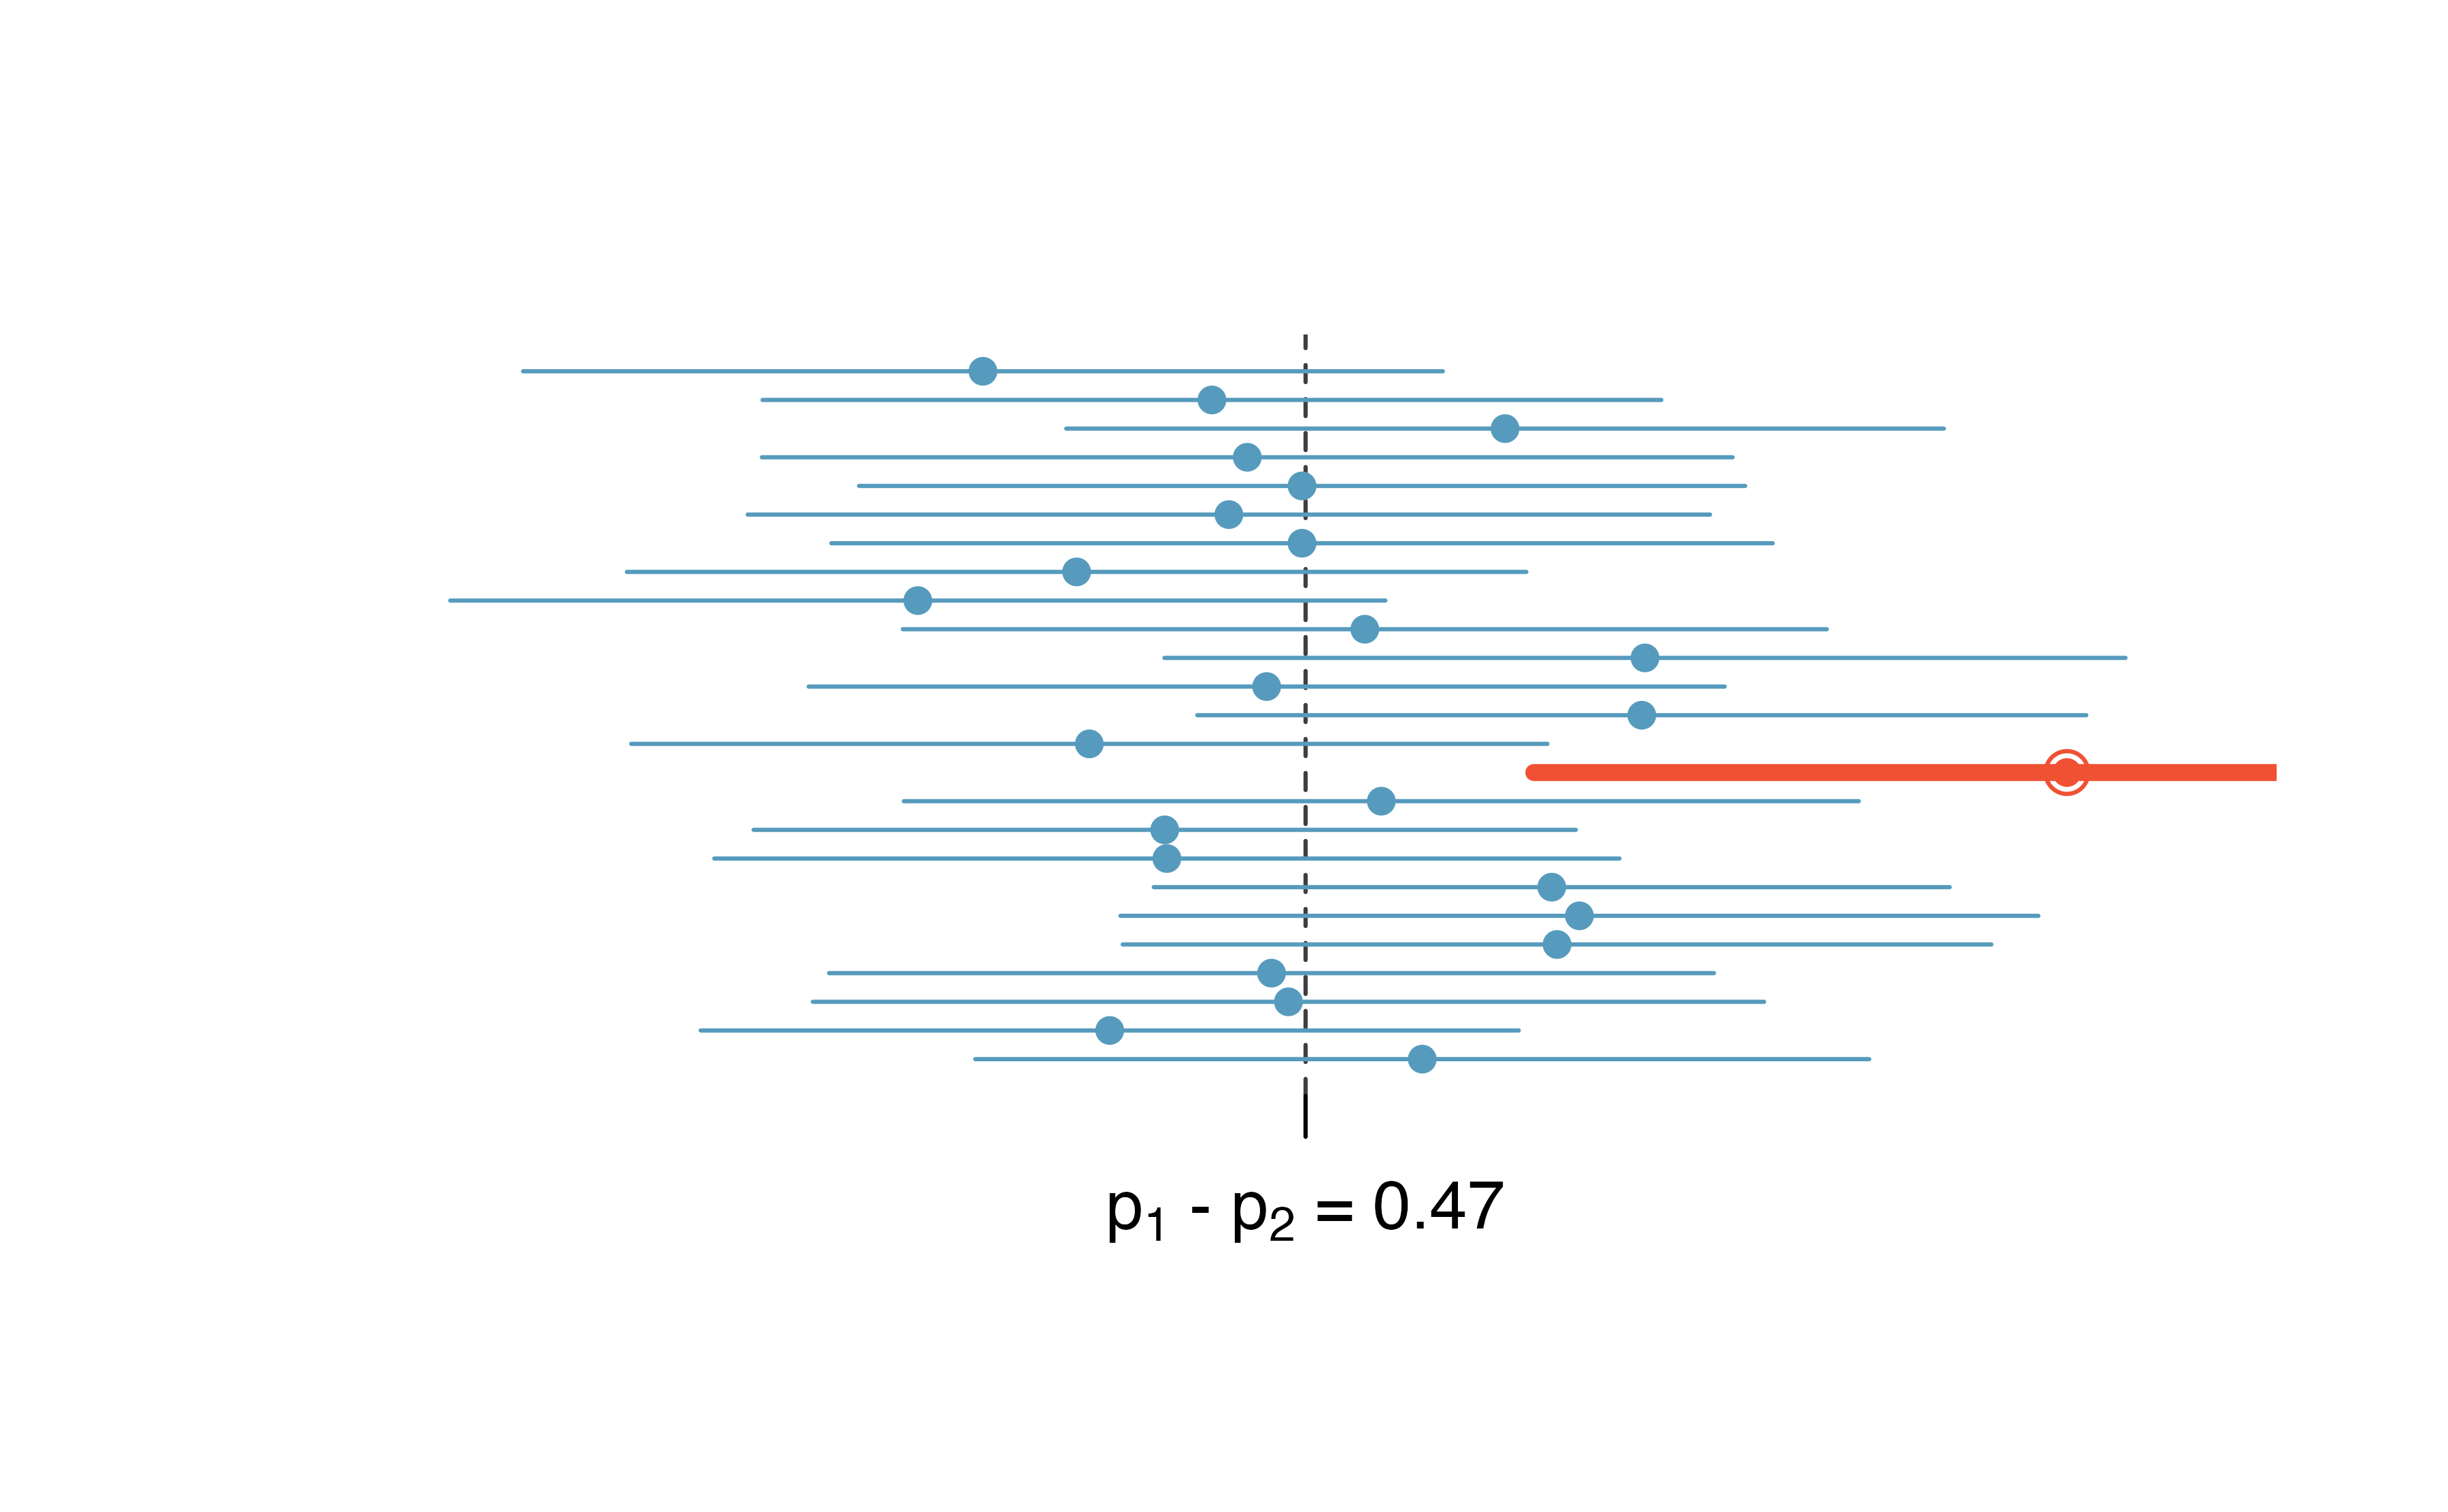 A series of 25 horizontal lines are drawn, representing each of 25 different studies (where a study represents two samples, one from each of population 1 and population 2).  Each vertical line starts at the value of the lower bound of the confidence interval and ends at the value of the upper bound of the confidence interval which was created from that particular sample.  In the center of the line is a solid dot at the observed difference in proportion of successes for sample 1 minus sample 2.  A dashed vertical line runs through the horizontal lines at p = 0.47 (which is the true value of the diffrence in population proportions).  24 of the 25 horizontal lines cross the vertical line at 0.47, but one of the horizontal lines is completely above than 0.47.  The line that does not cross 0.47 is colored red because the confidence interval from that particular sample would not have captured the true difference in population proportions.